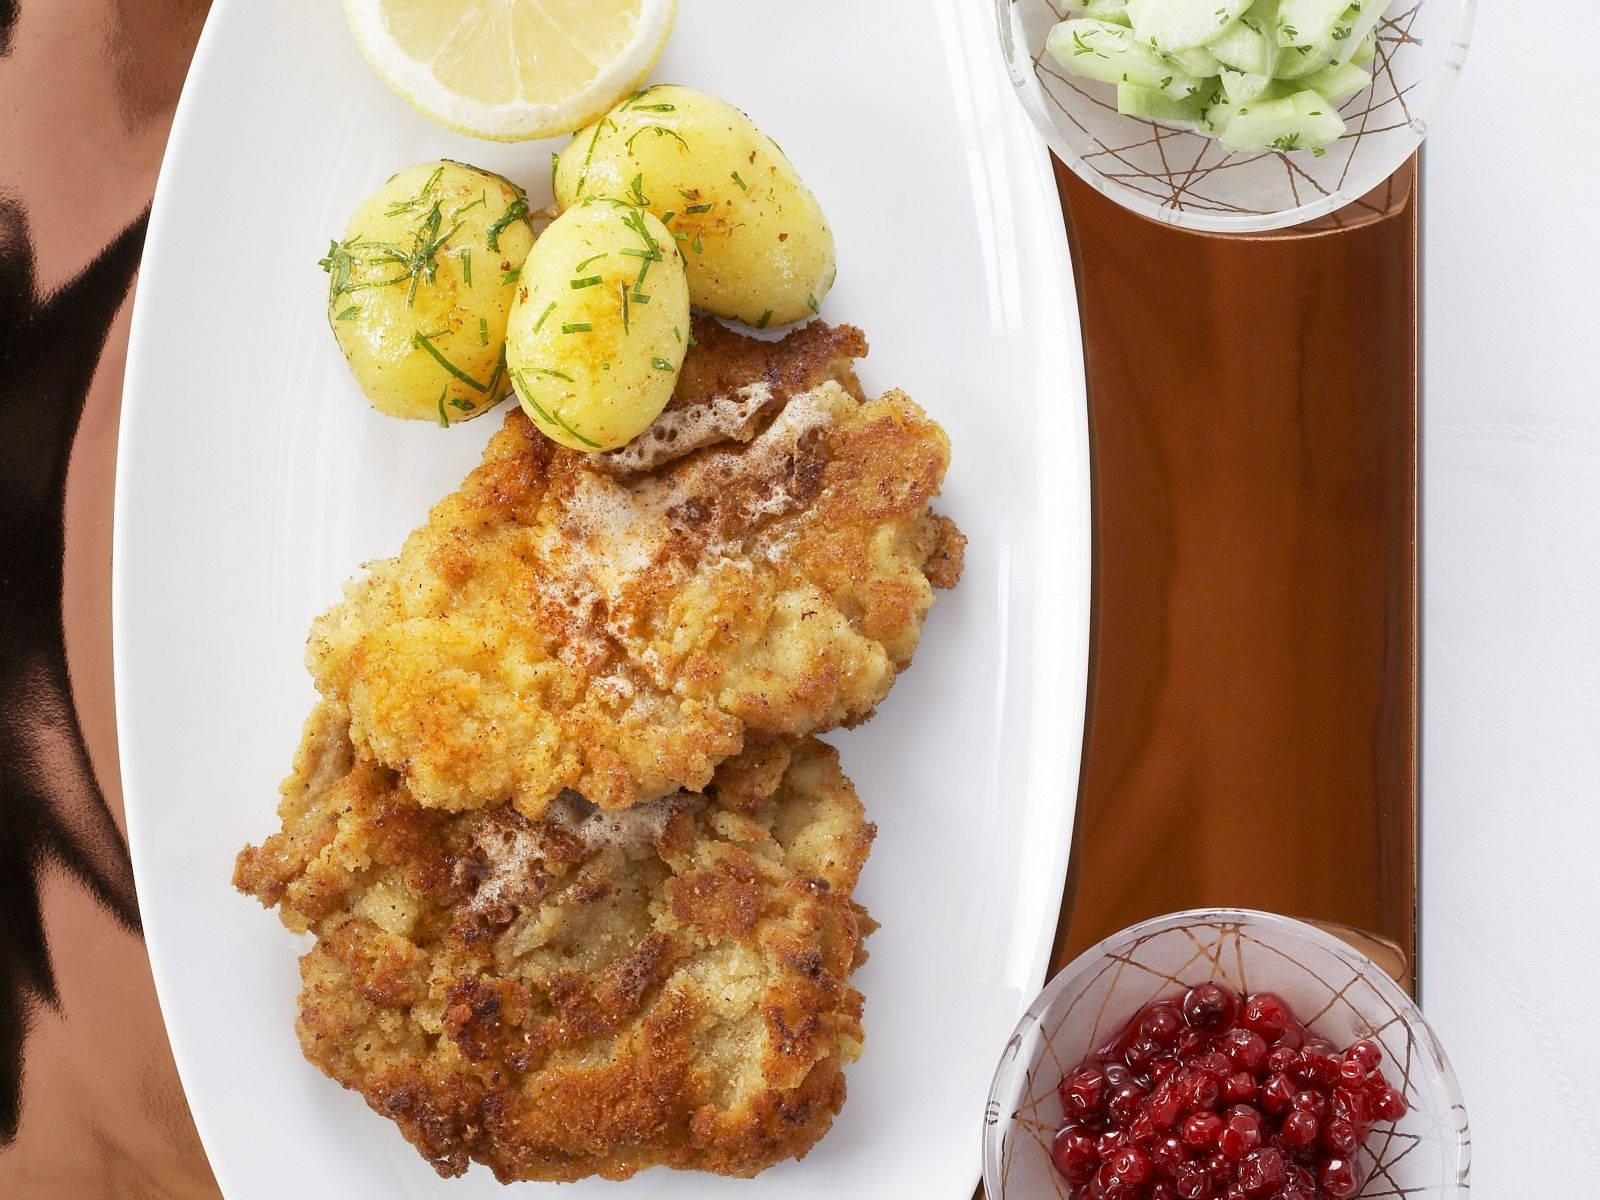 Unfortunately,wiener Schnitzel With Marble Potato Doesn't Have Any Relevance Or Context To Computer Or Mobile Wallpaper. Can You Please Provide Sentences Related To The Topic? Wallpaper